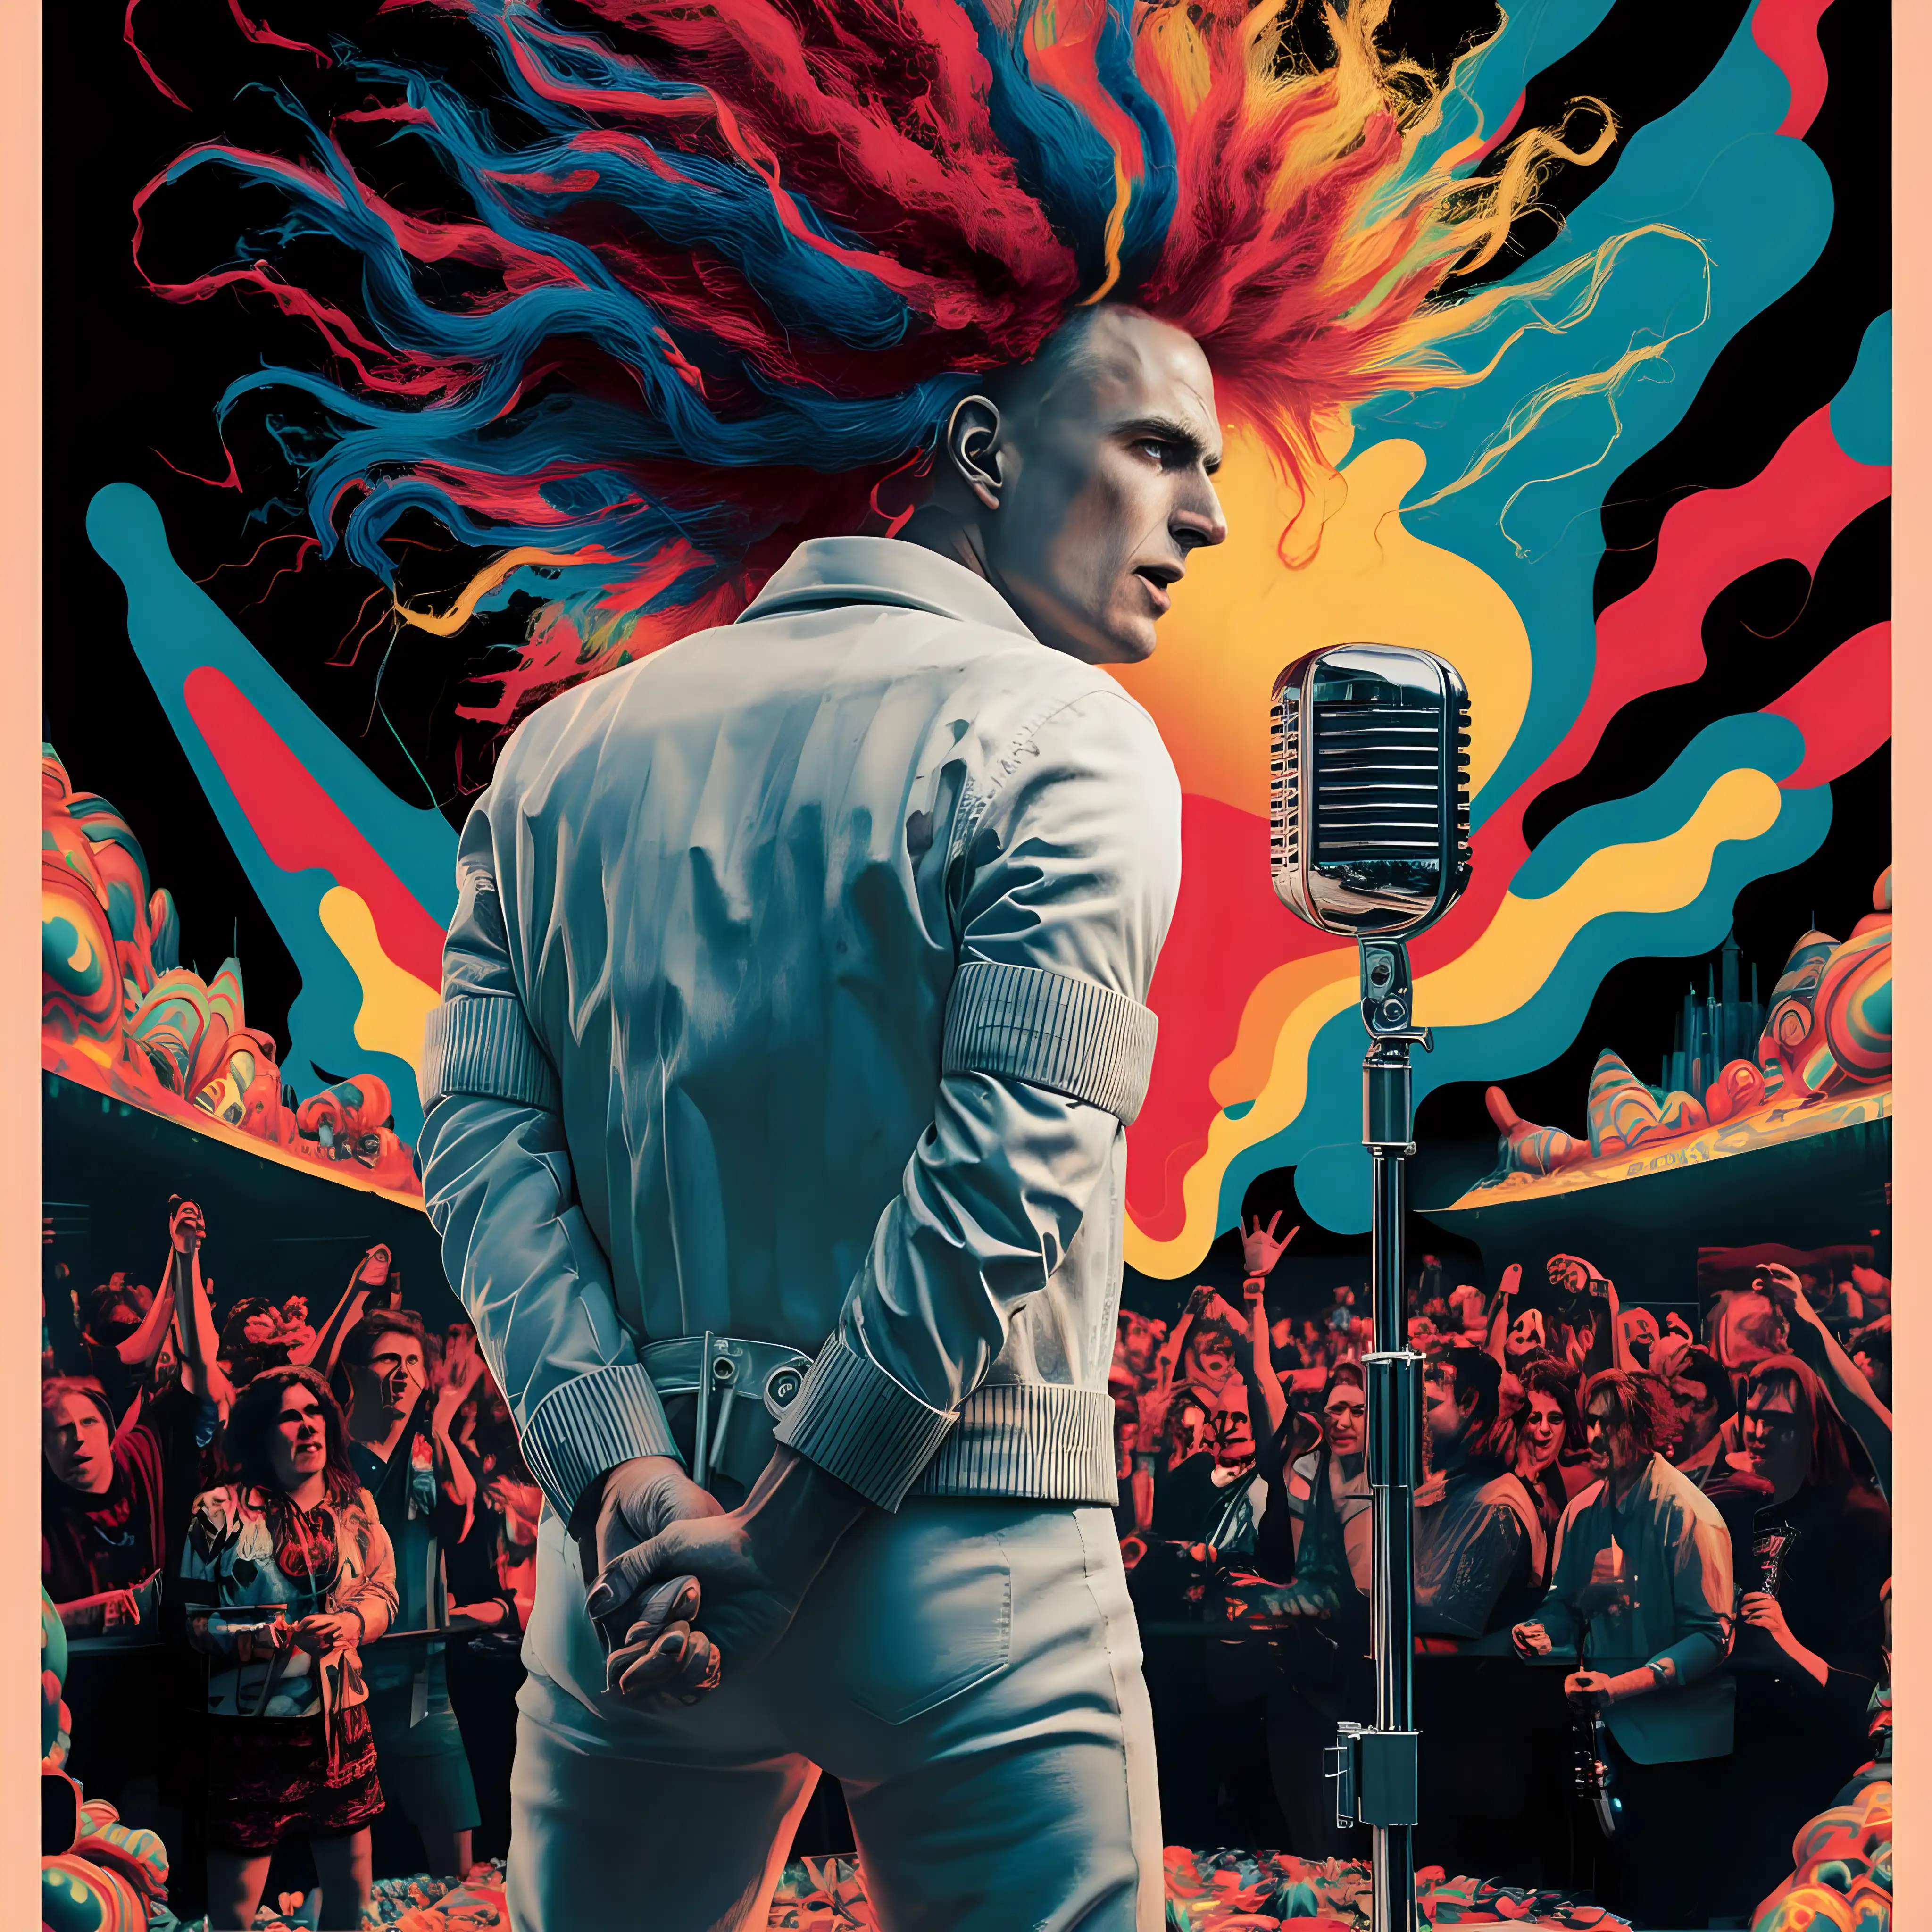 View of a white man from behind, facing away, his arms restrained in the sleeves of a straight jacket, he speaks at a microphone
His sleeves are tied behind his back
Technicolor
Speaking to a large crowd
Concert poster